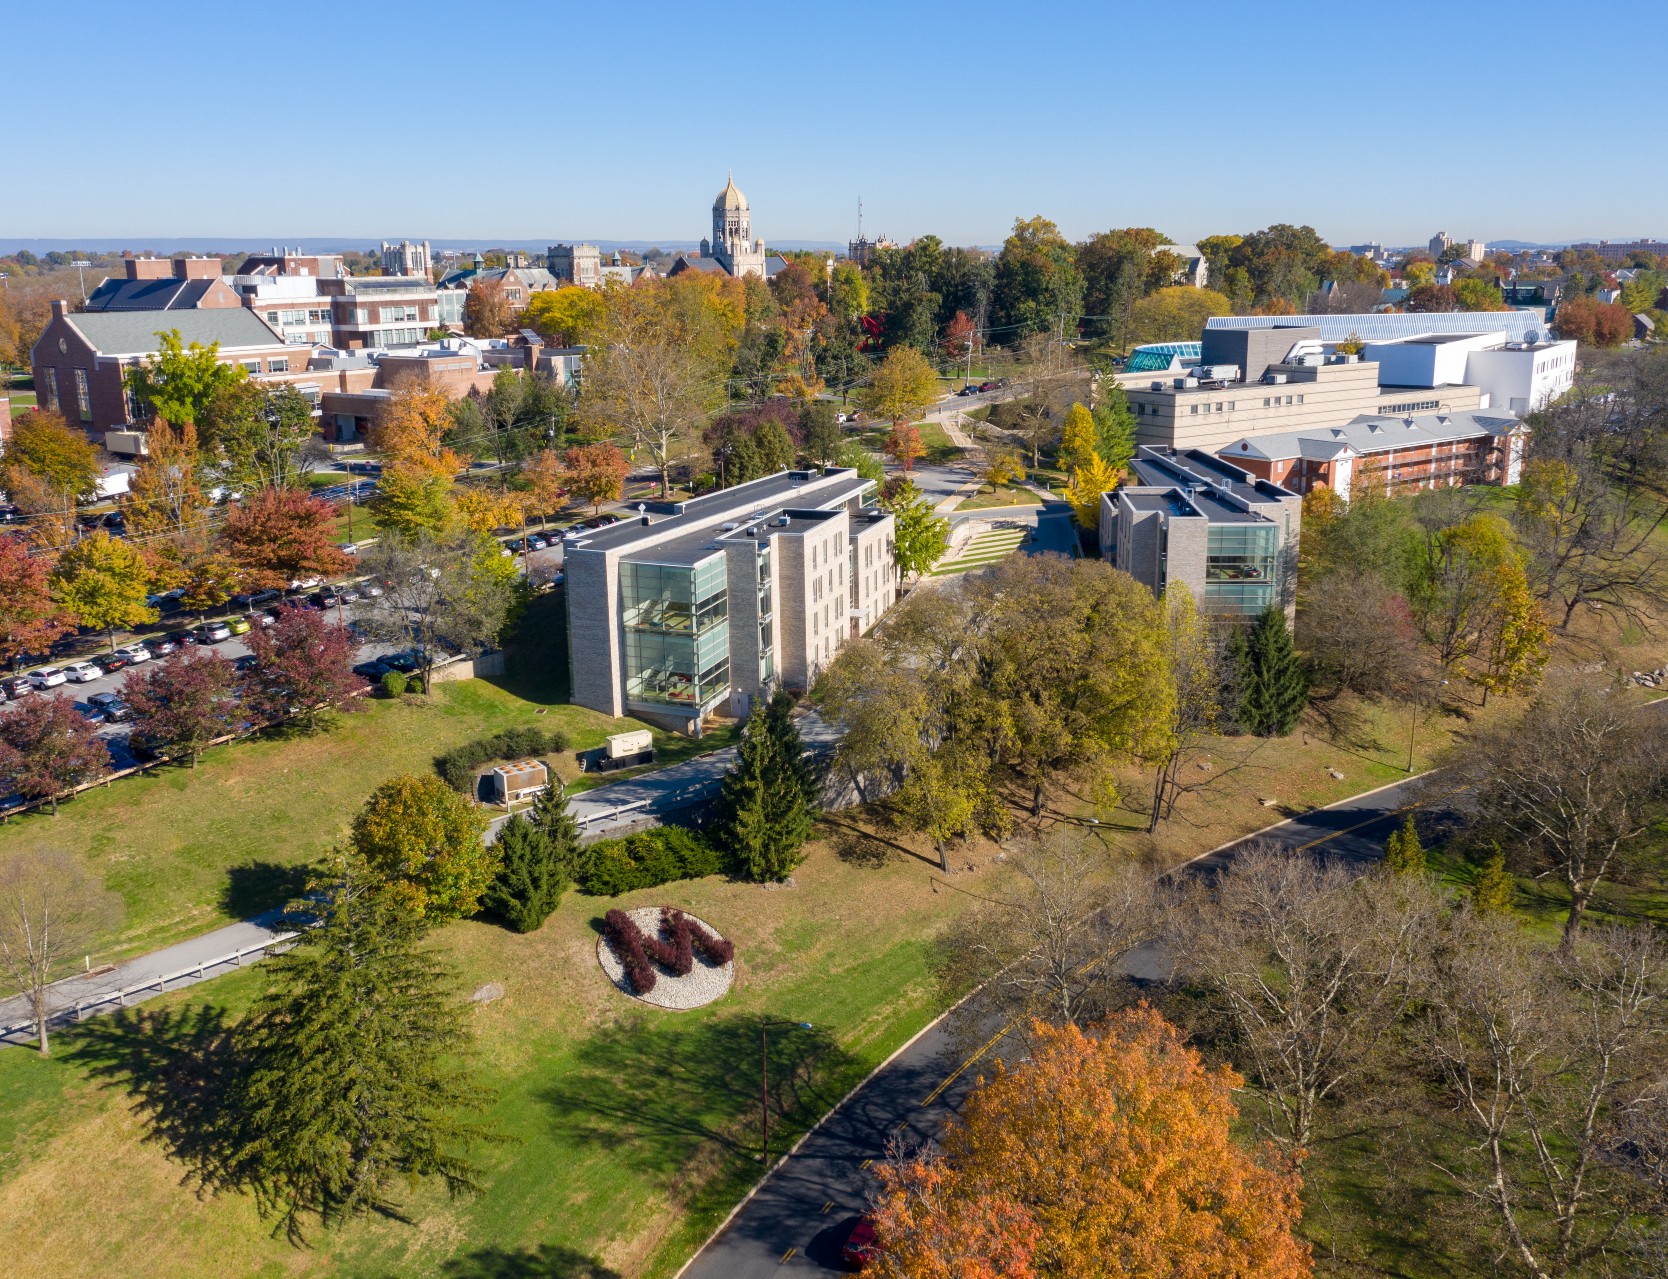 An aerial view of Muhlenberg College taken from a flying drone.